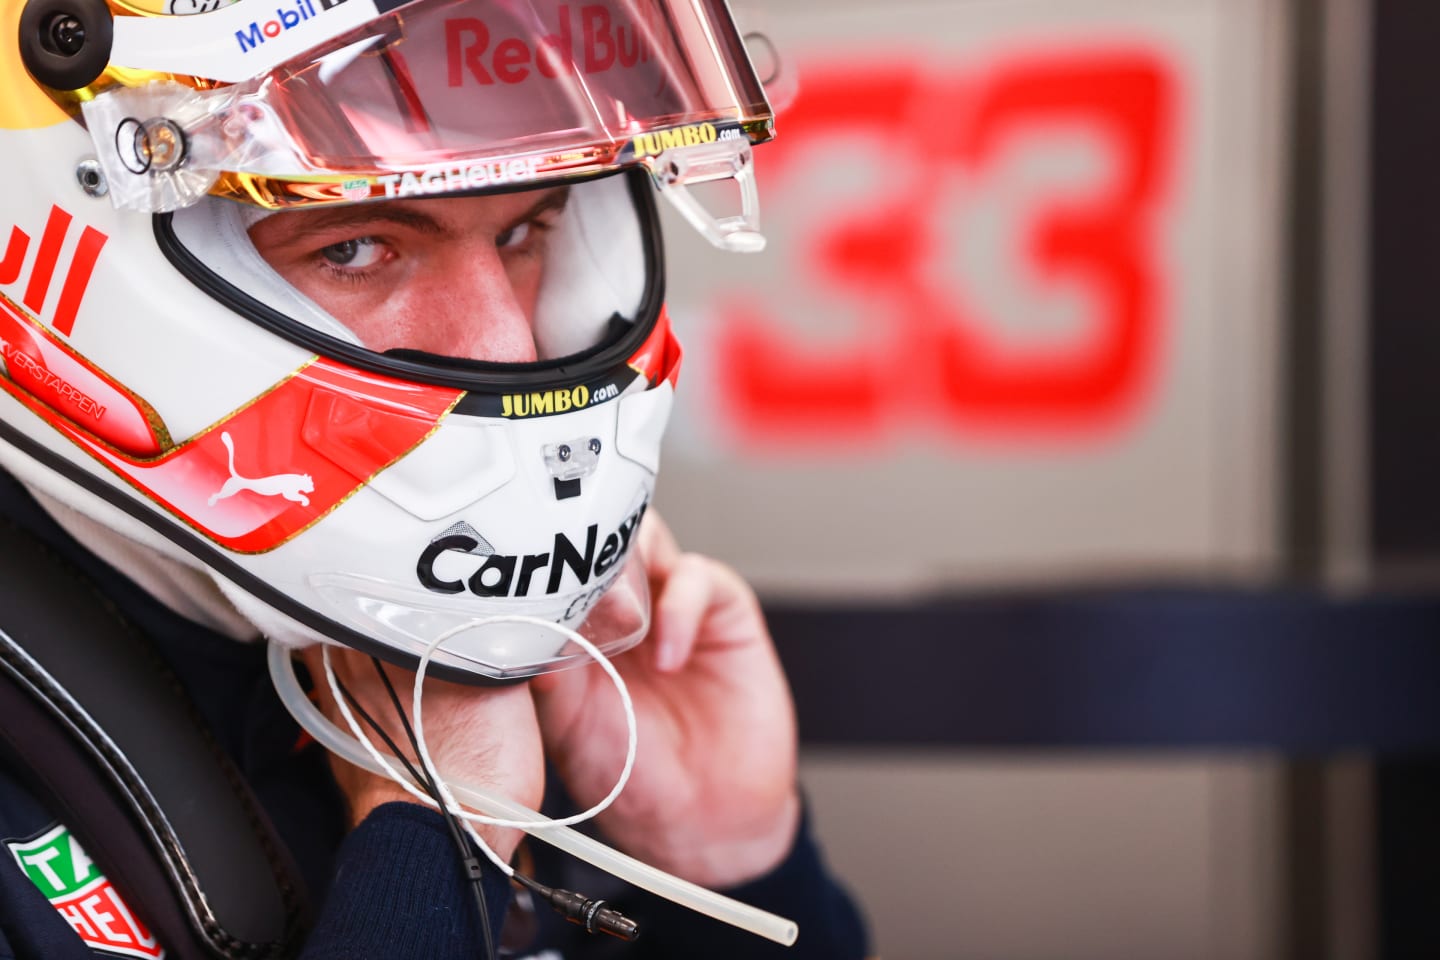 BUDAPEST, HUNGARY - AUGUST 01: Max Verstappen of Netherlands and Red Bull Racing prepares to drive